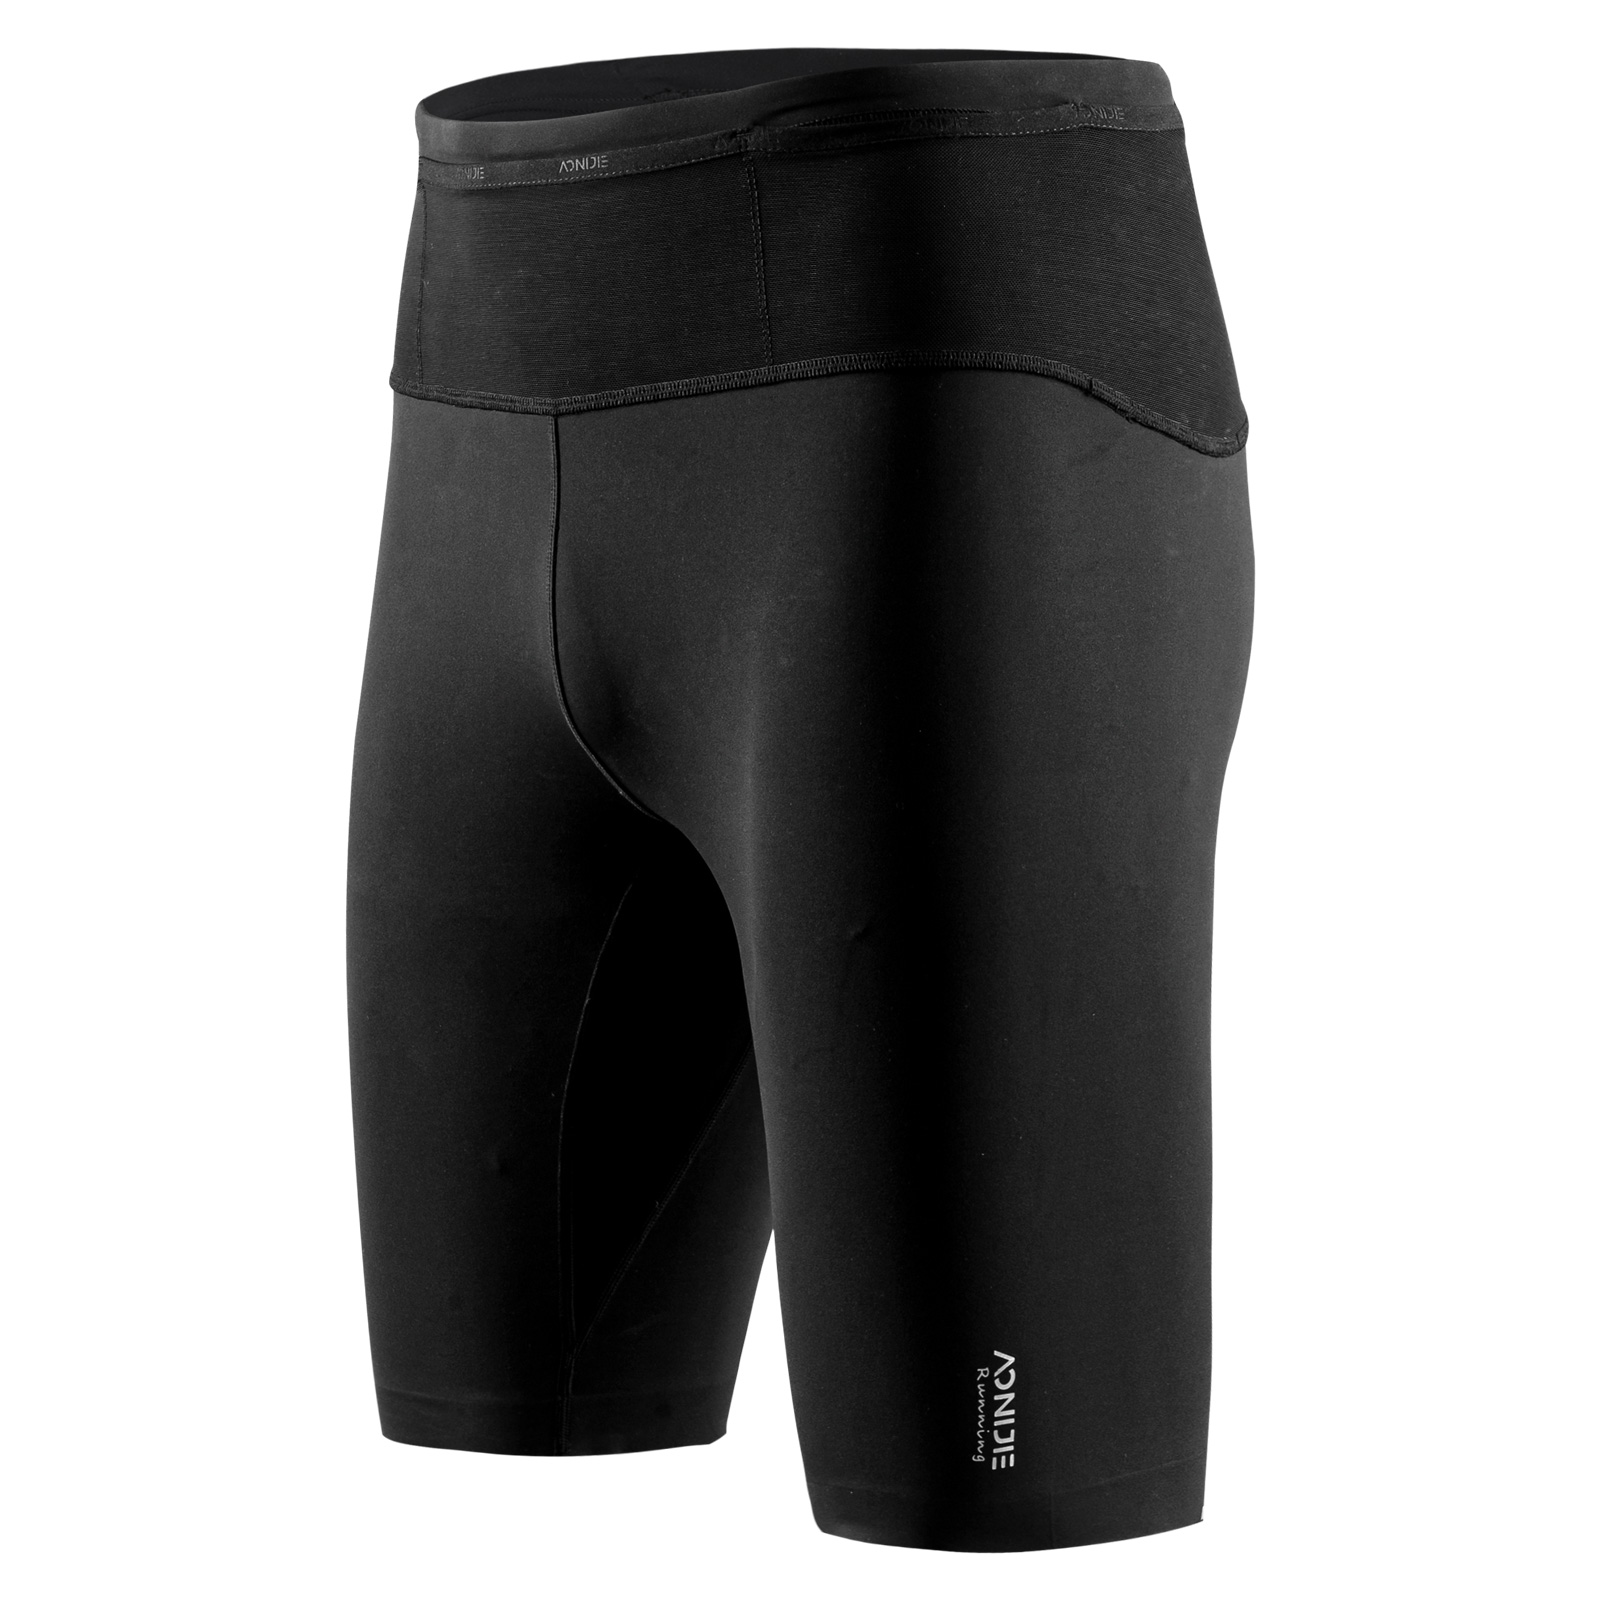 AONIJIE FM5120 Men Sports Compression Pants Lightweight Tight Running Pants Moisture Absorption Wear-resistant Non-slip Black Riding Trousers